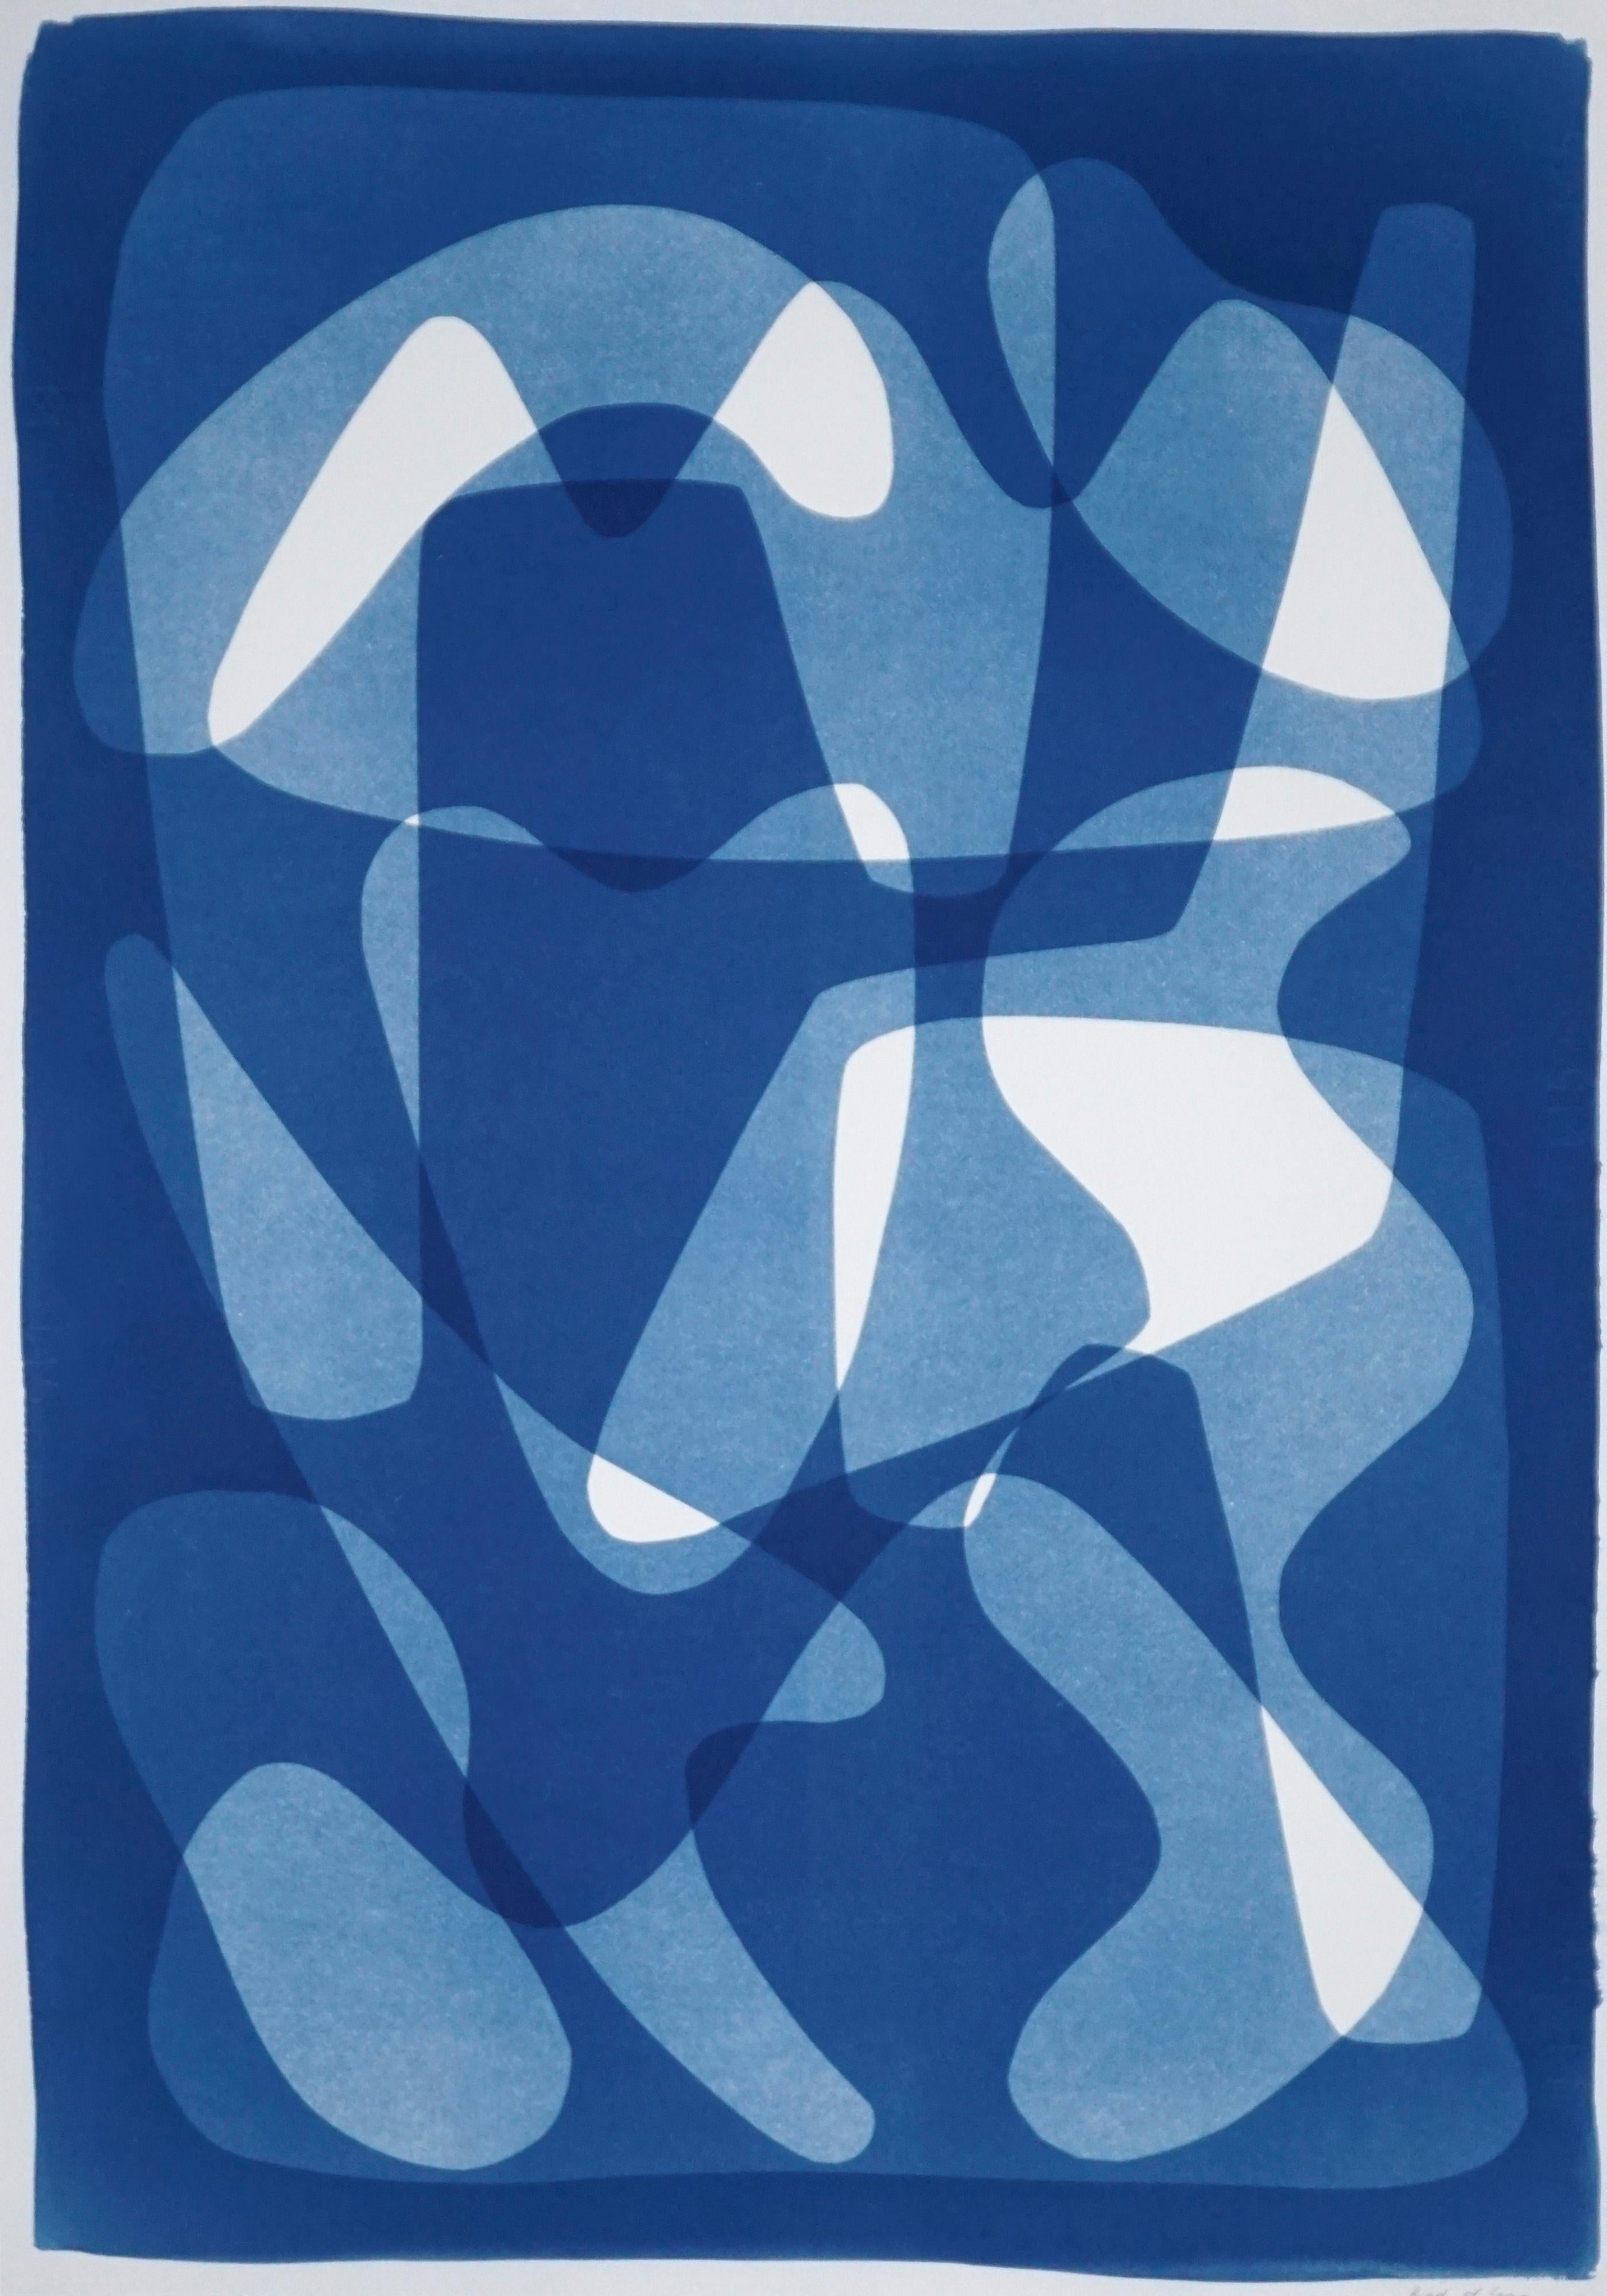 Kind of Cyan Abstract Photograph - Geometric Mid-Century Vibes, Blue Tones Cyanotype Print, Cutout Shapes on Paper